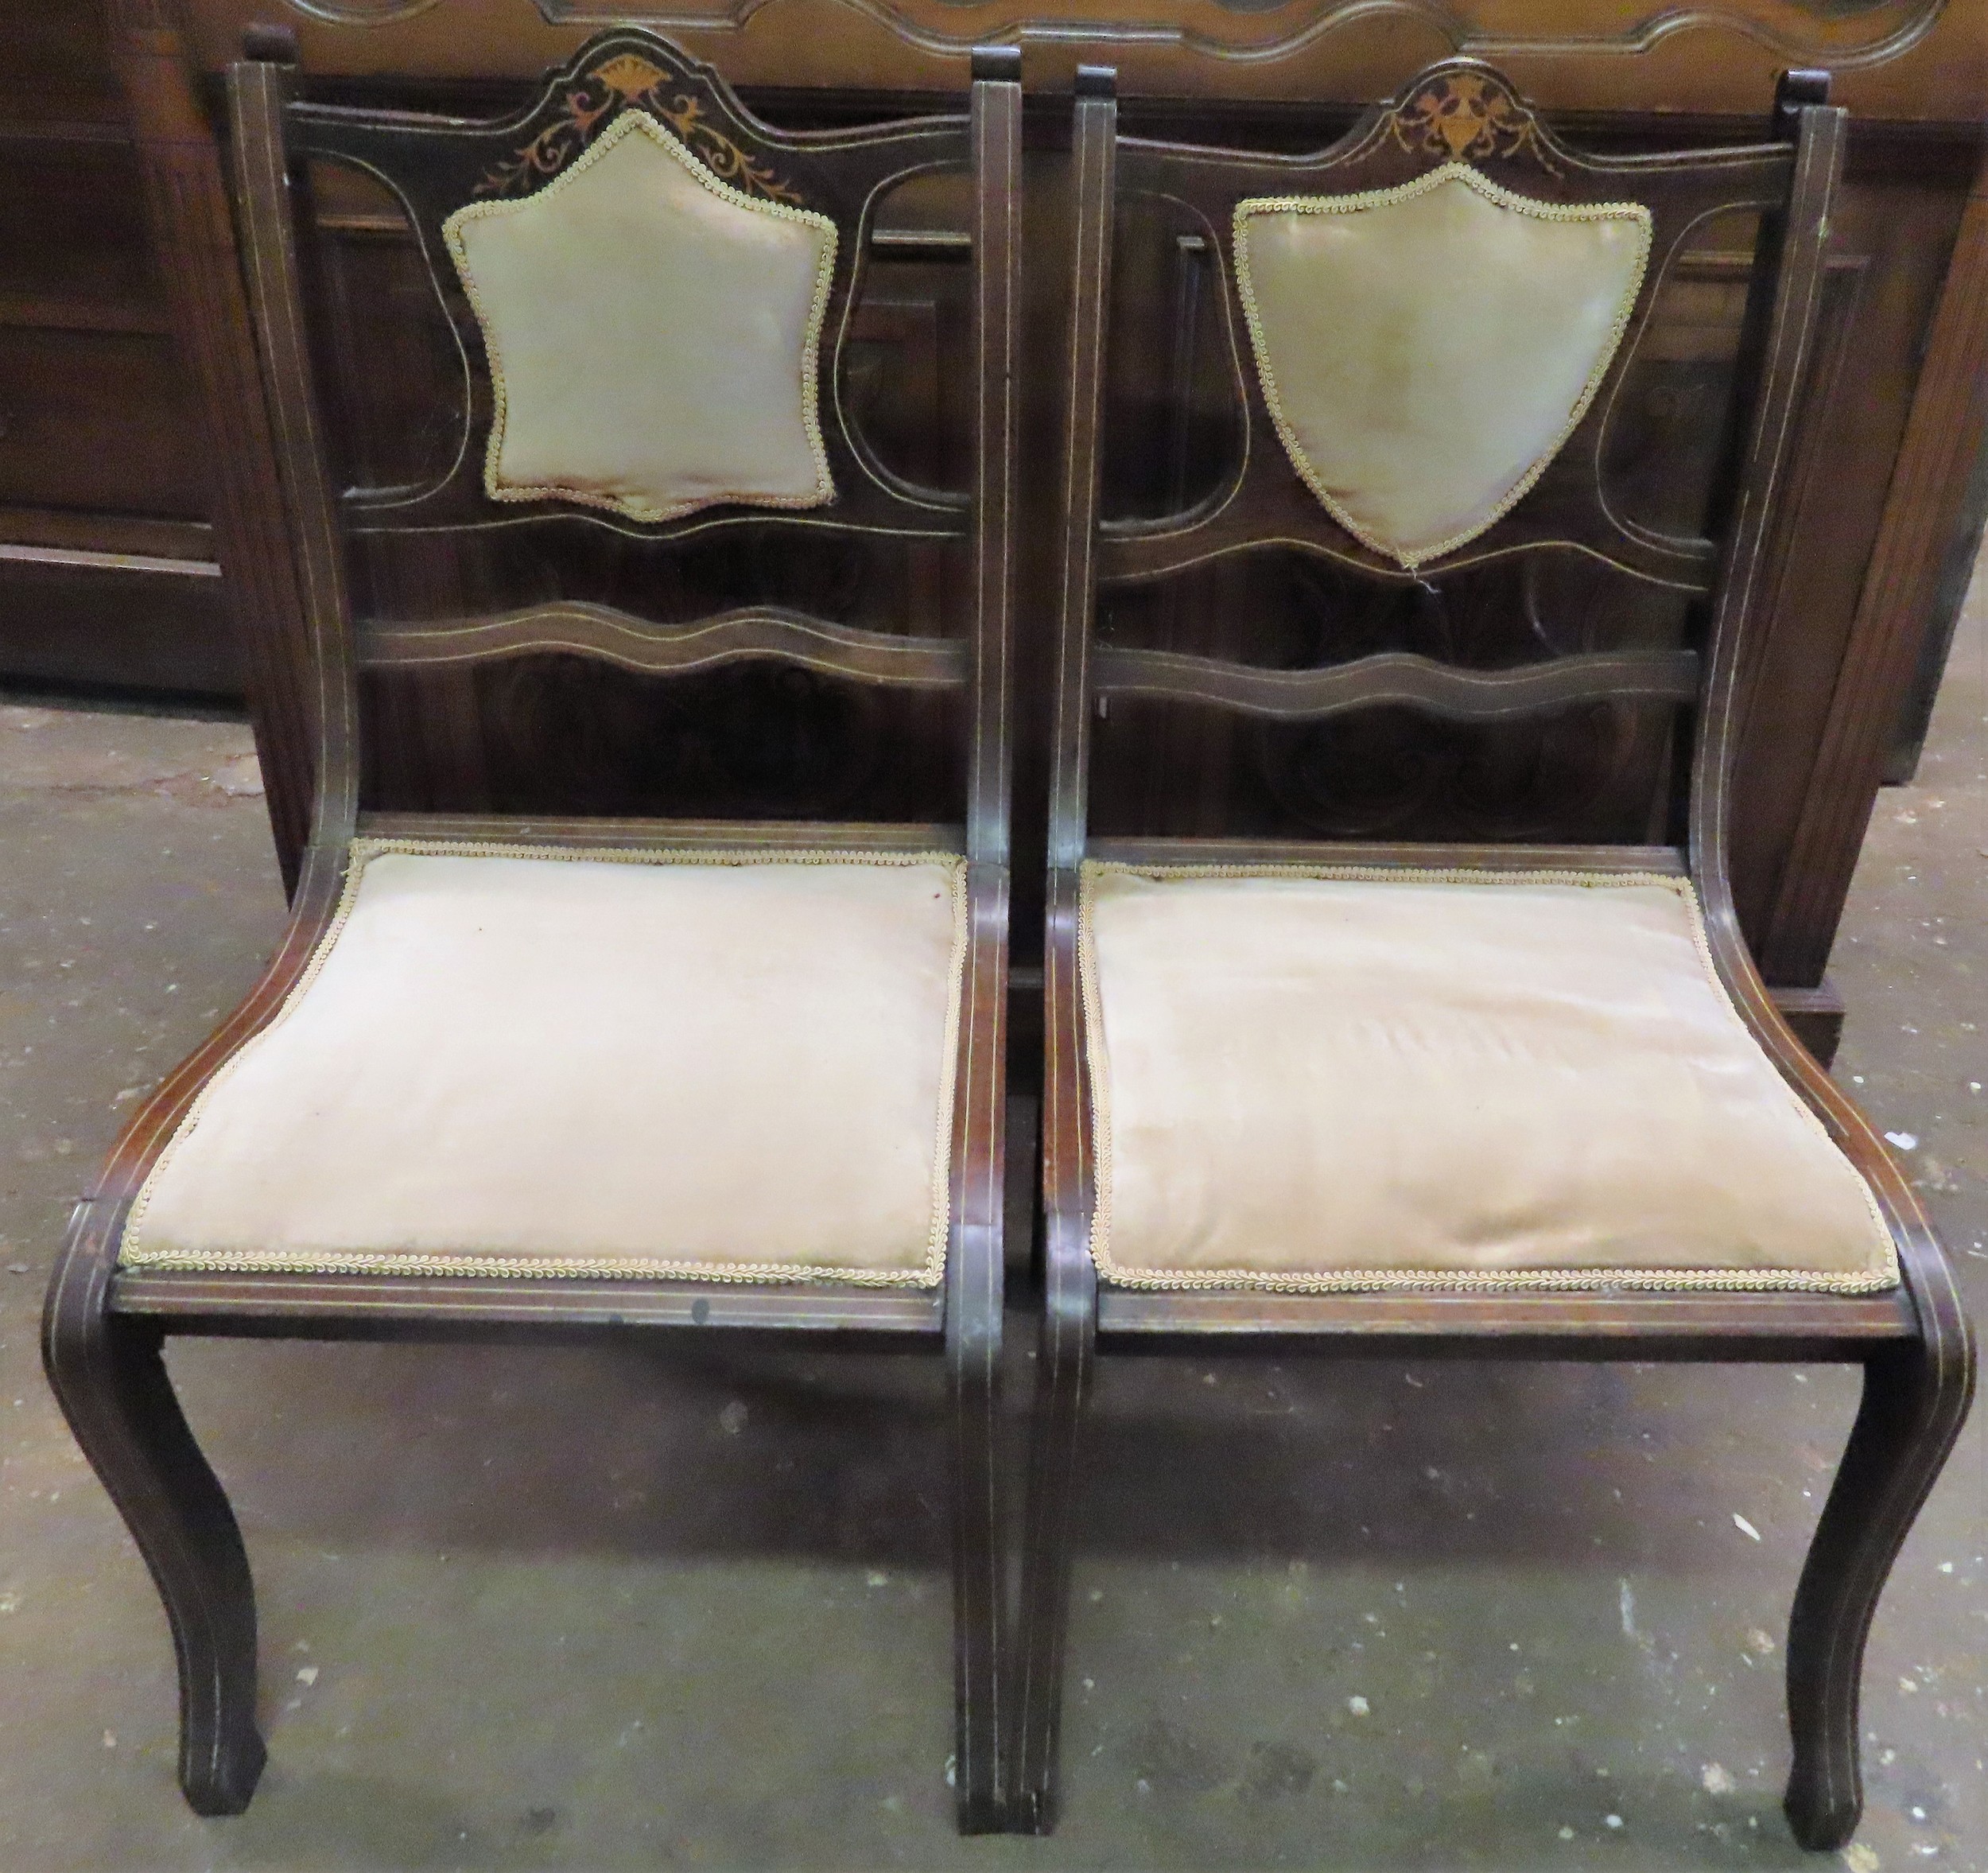 Pair of Edwardian mahogany inlaid and upholstered low bedroom chairs